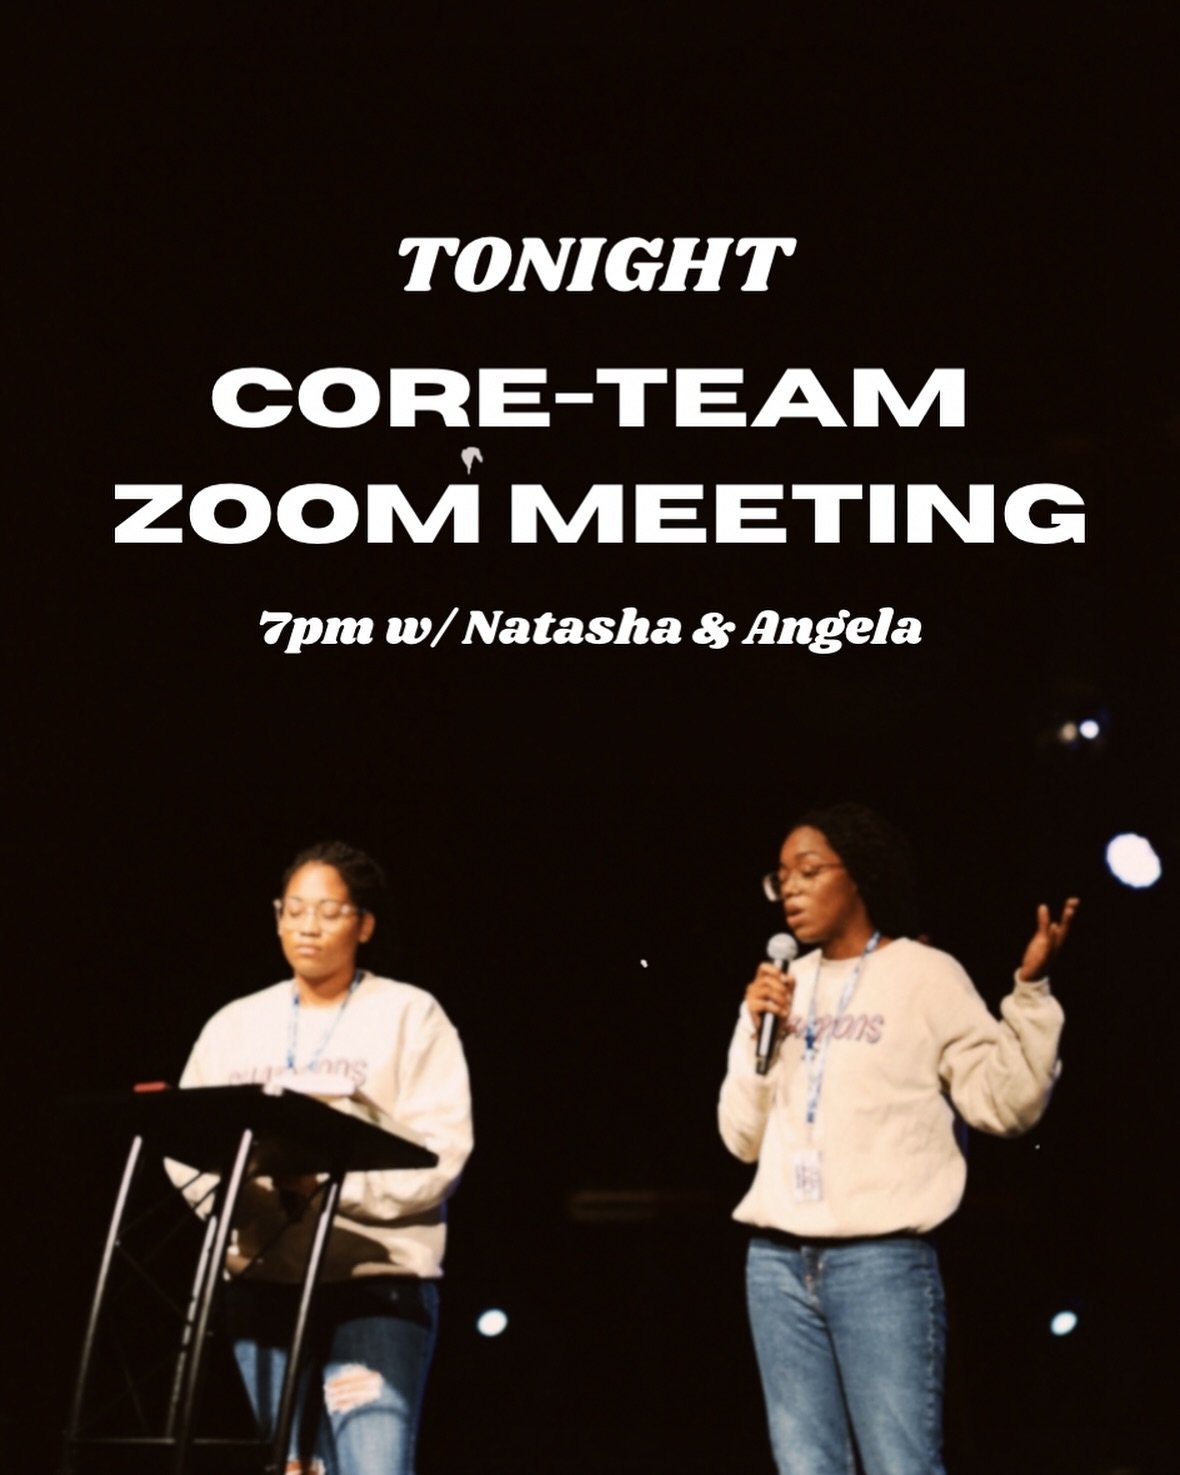 Tune into our CORE TEAM meeting at 7!! We&rsquo;ve got big things we&rsquo;re announcing tonight! Talk to you guys soon!!! 👊🔥